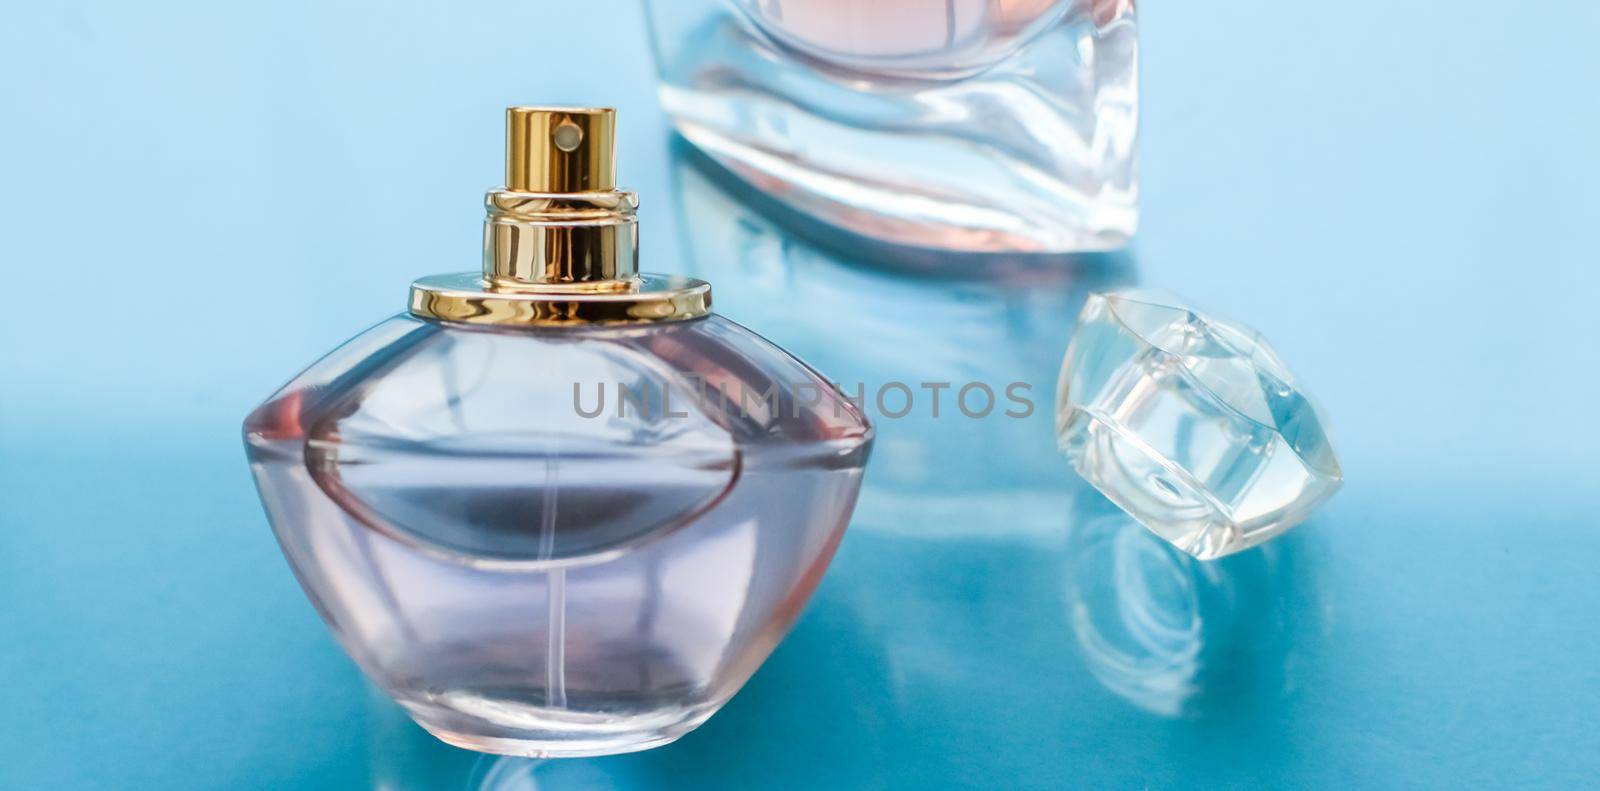 Pink perfume bottle on glossy background, sweet floral scent, glamour fragrance and eau de parfum as holiday gift and luxury beauty cosmetics brand design by Anneleven